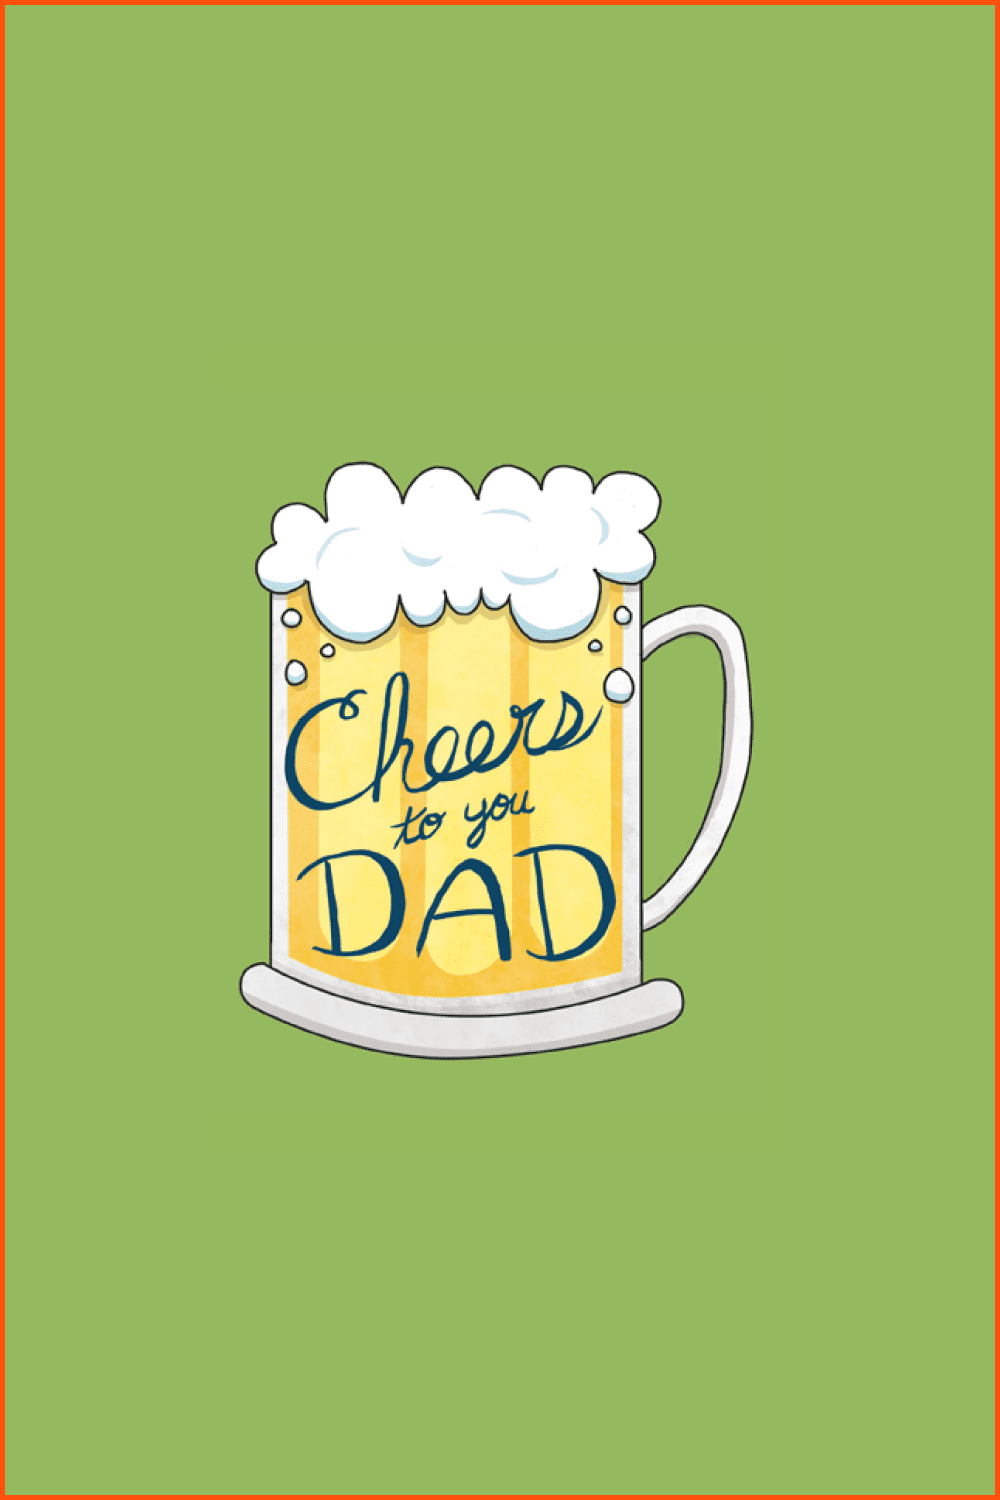 Cheers To You - Dad eCard by Claire Lordon.